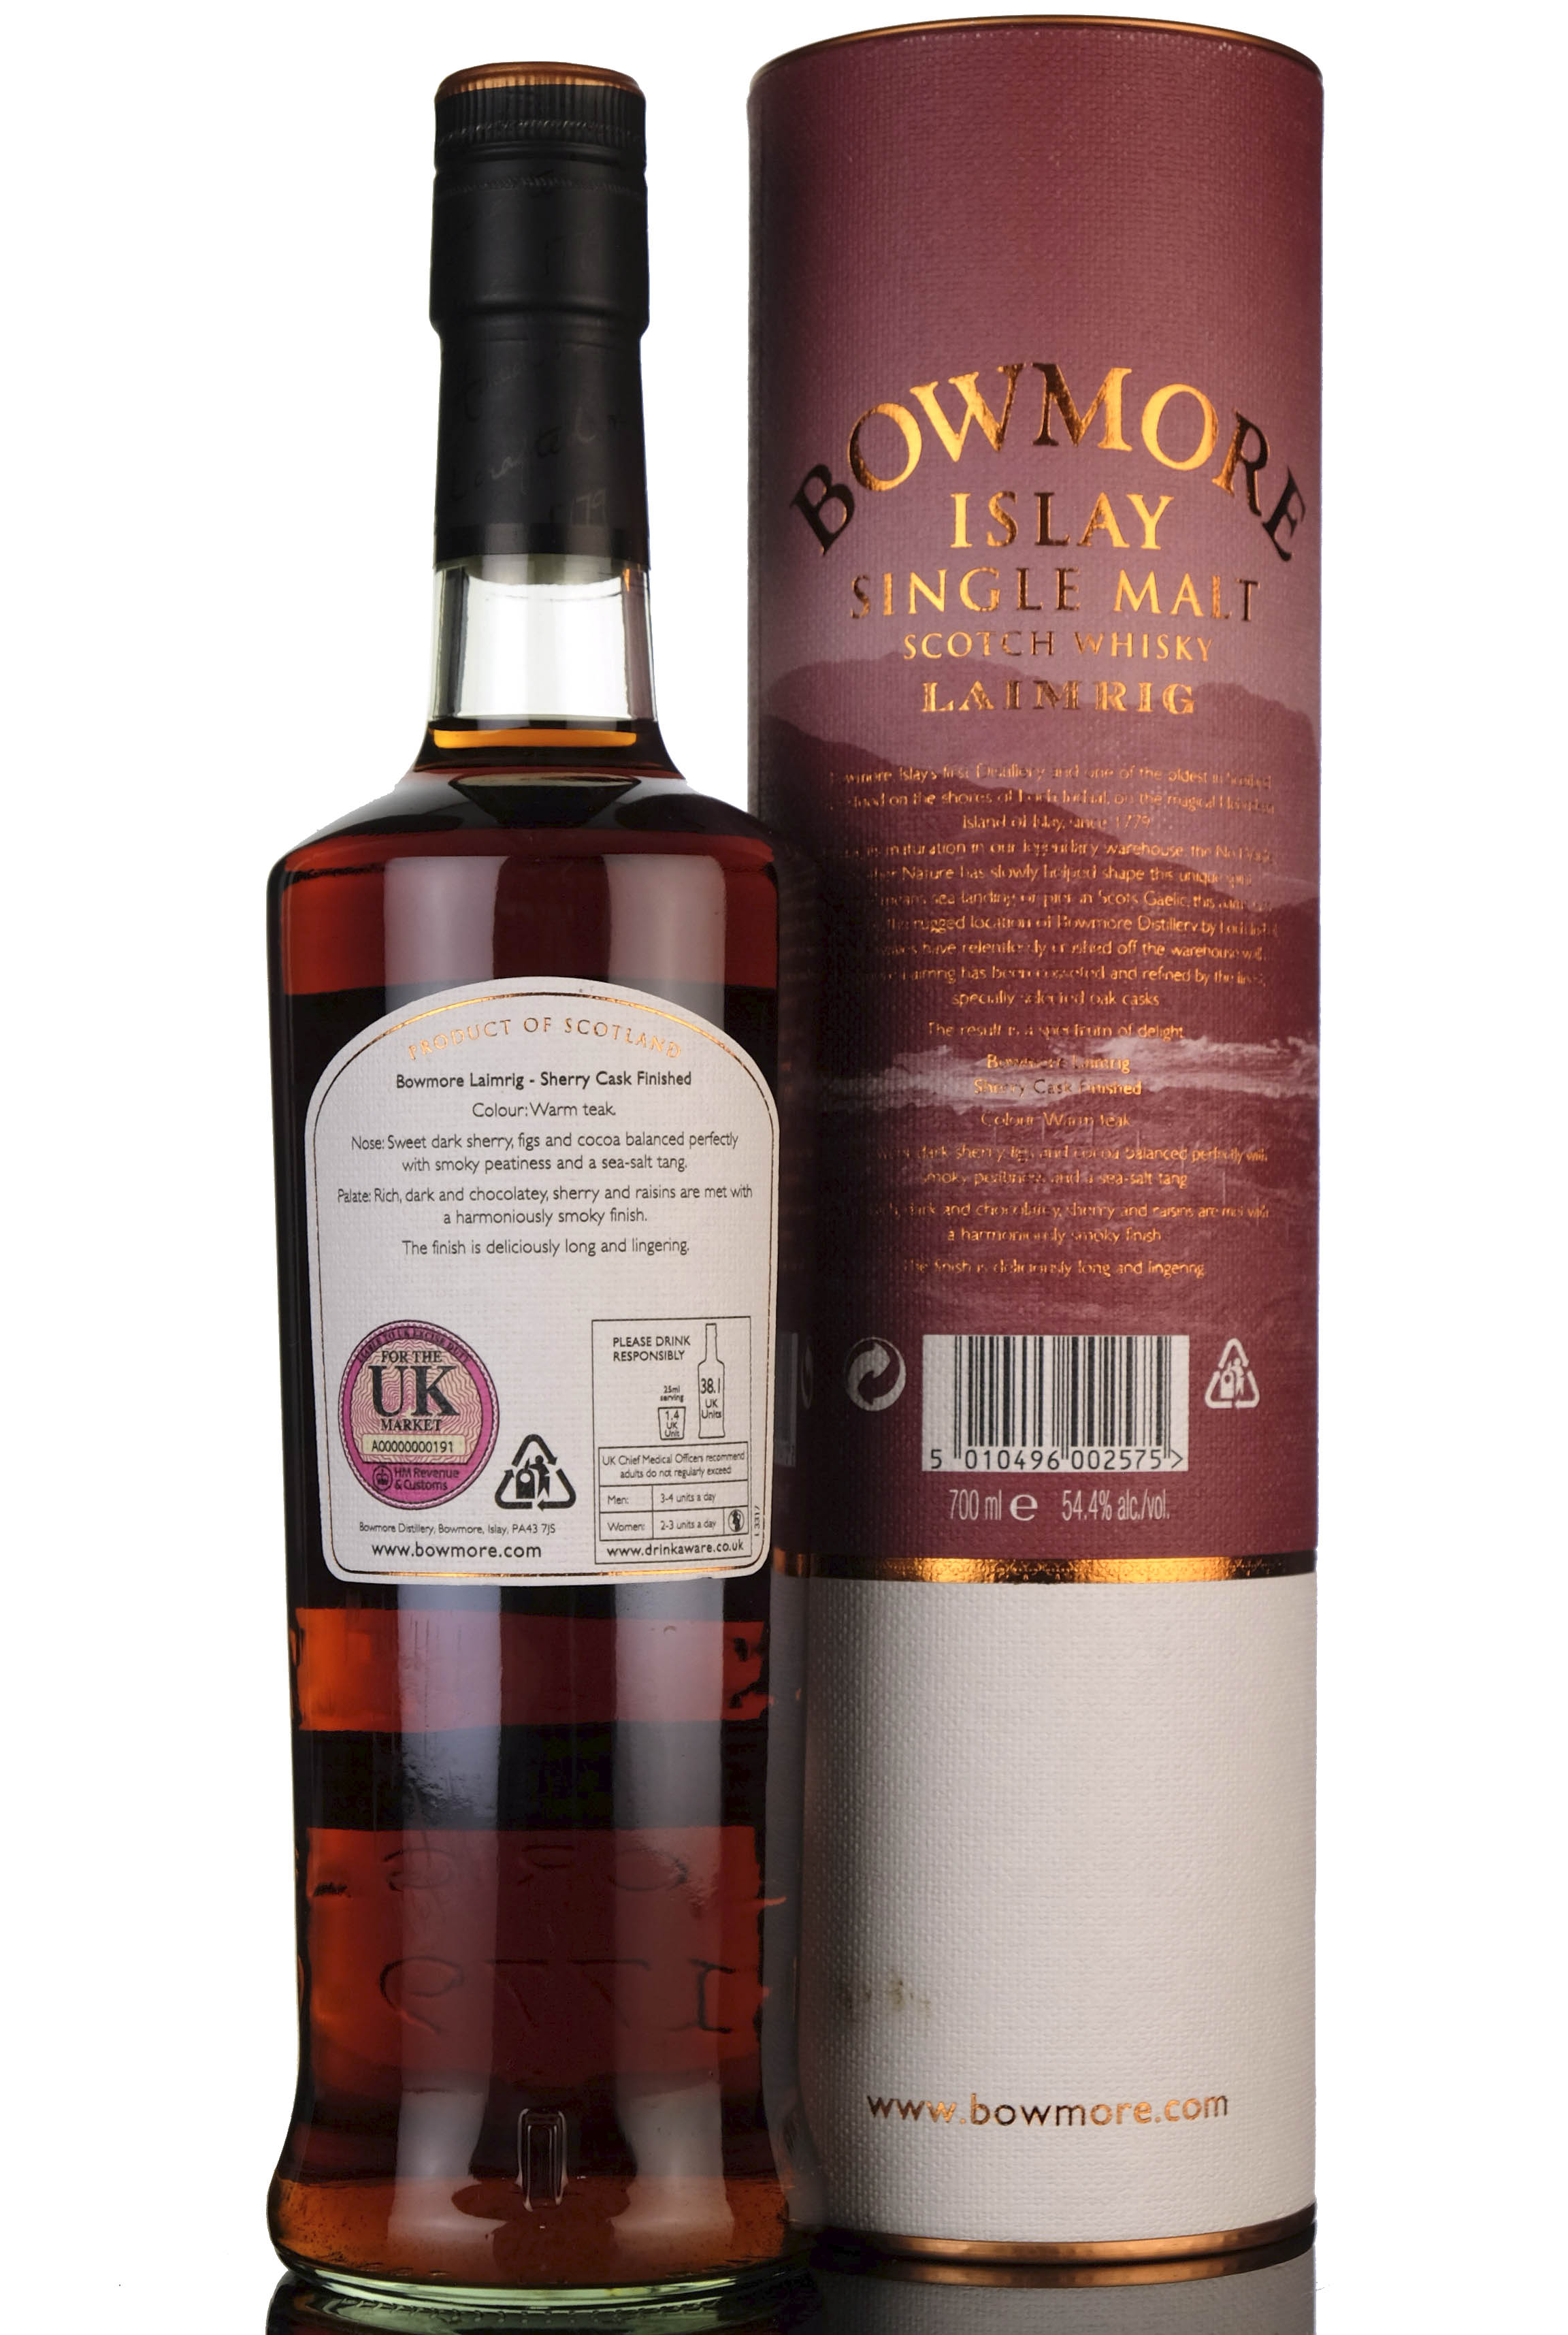 Bowmore 15 Years Old - Laimrig - Festival 2011